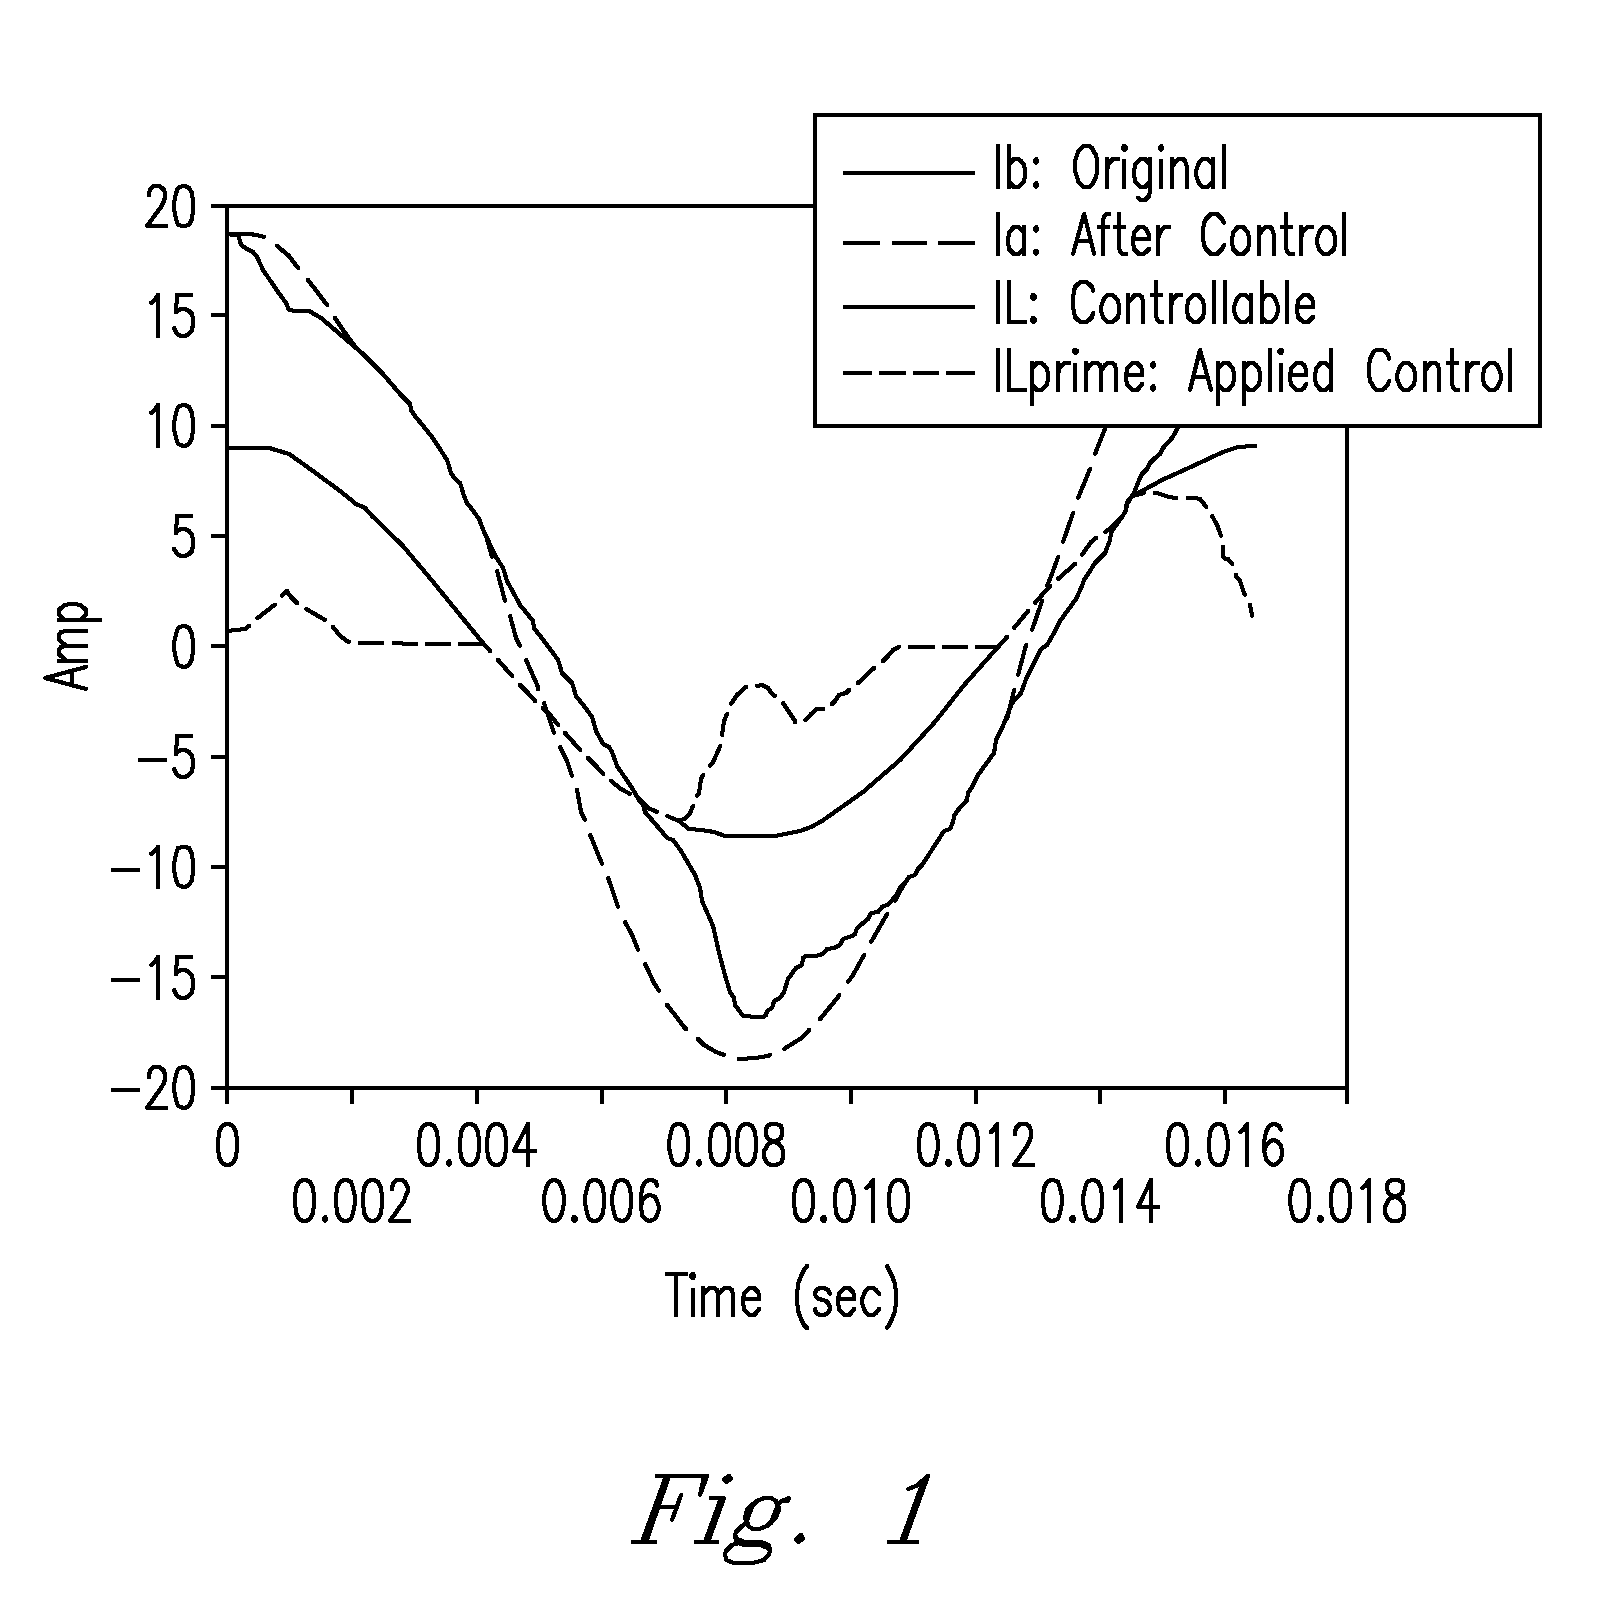 Device, method, and system for improving electrical power factor and harmonic power quality through active control of power quality improving electrical appliances